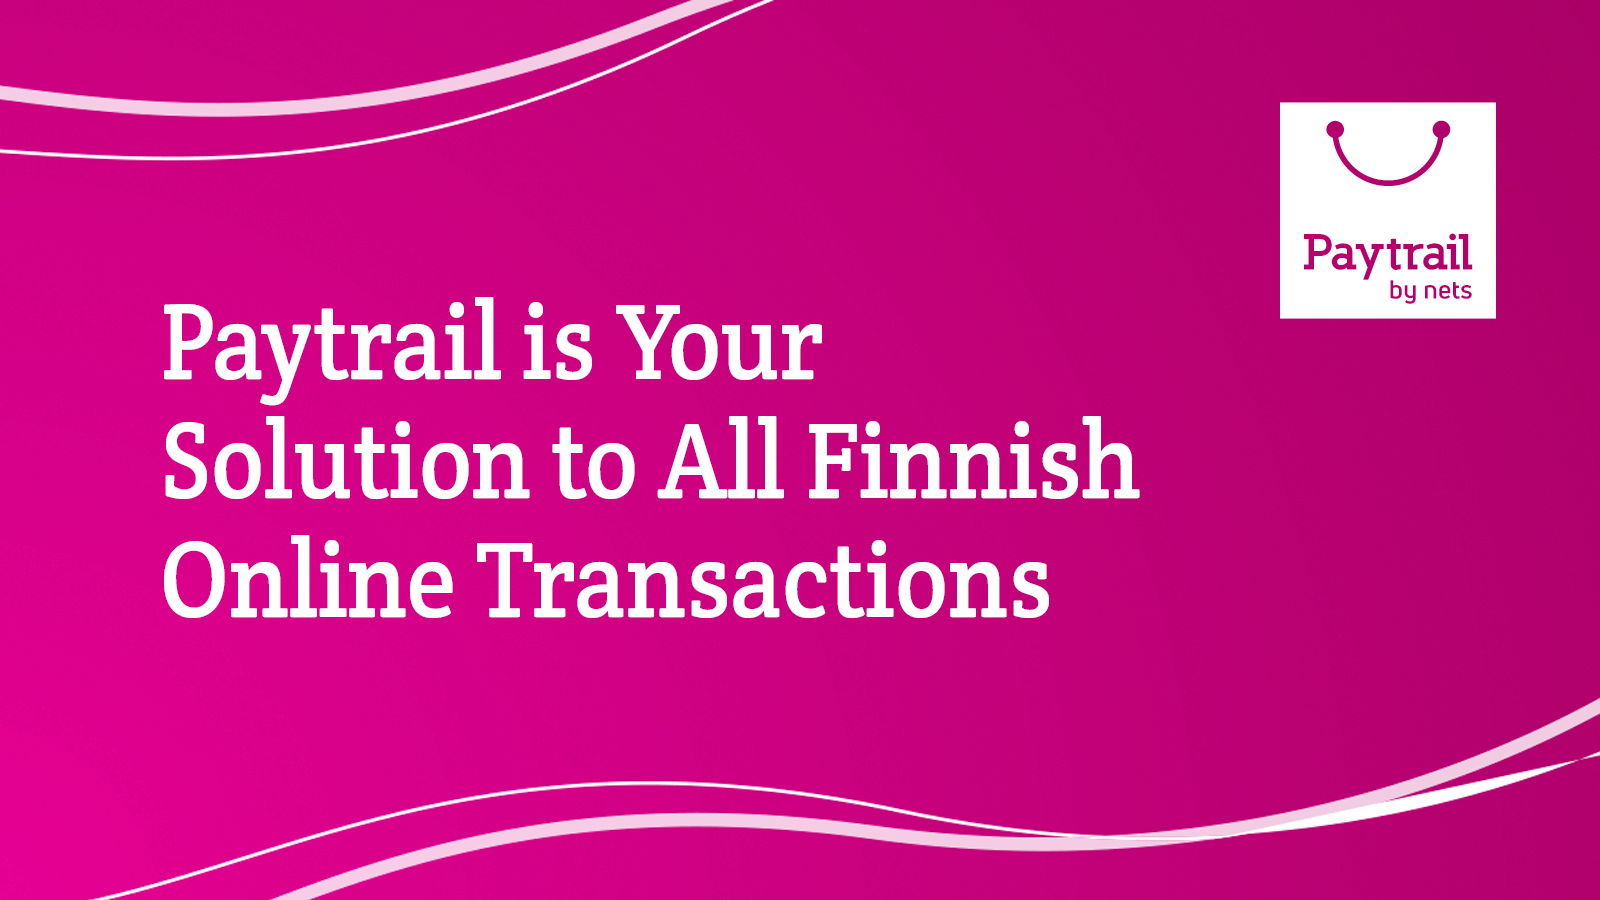 Paytrail payment solution for online transactions